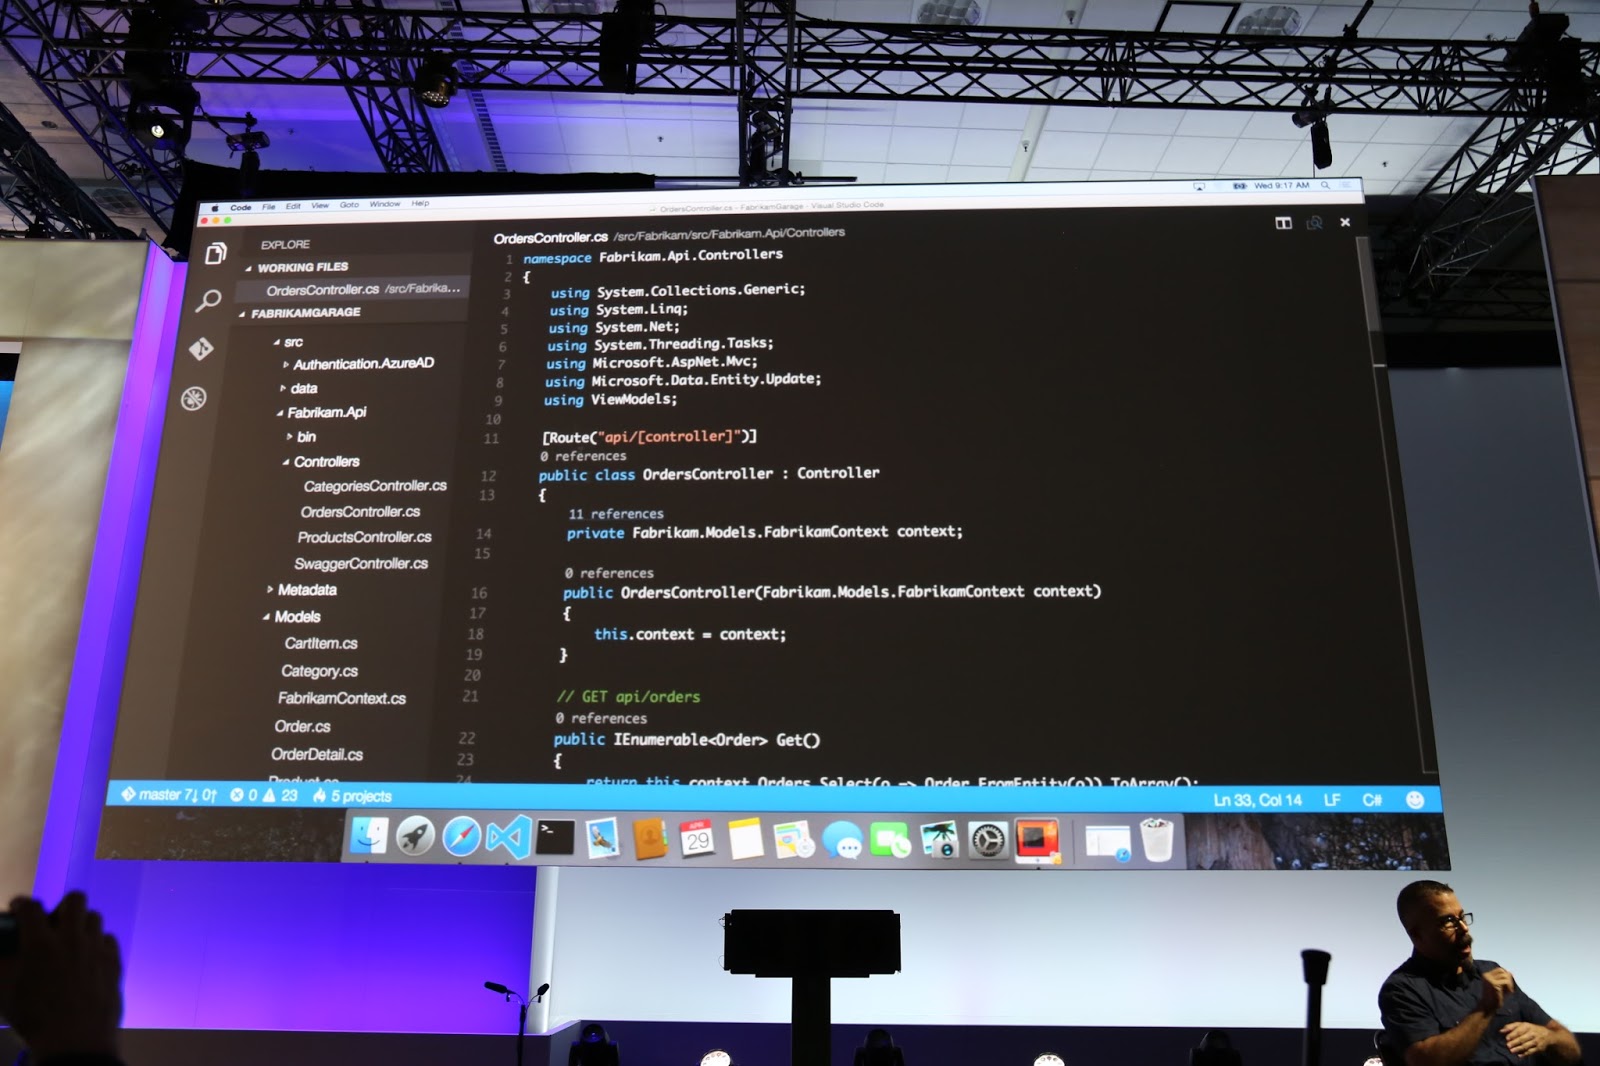 visual studio for mac preview review